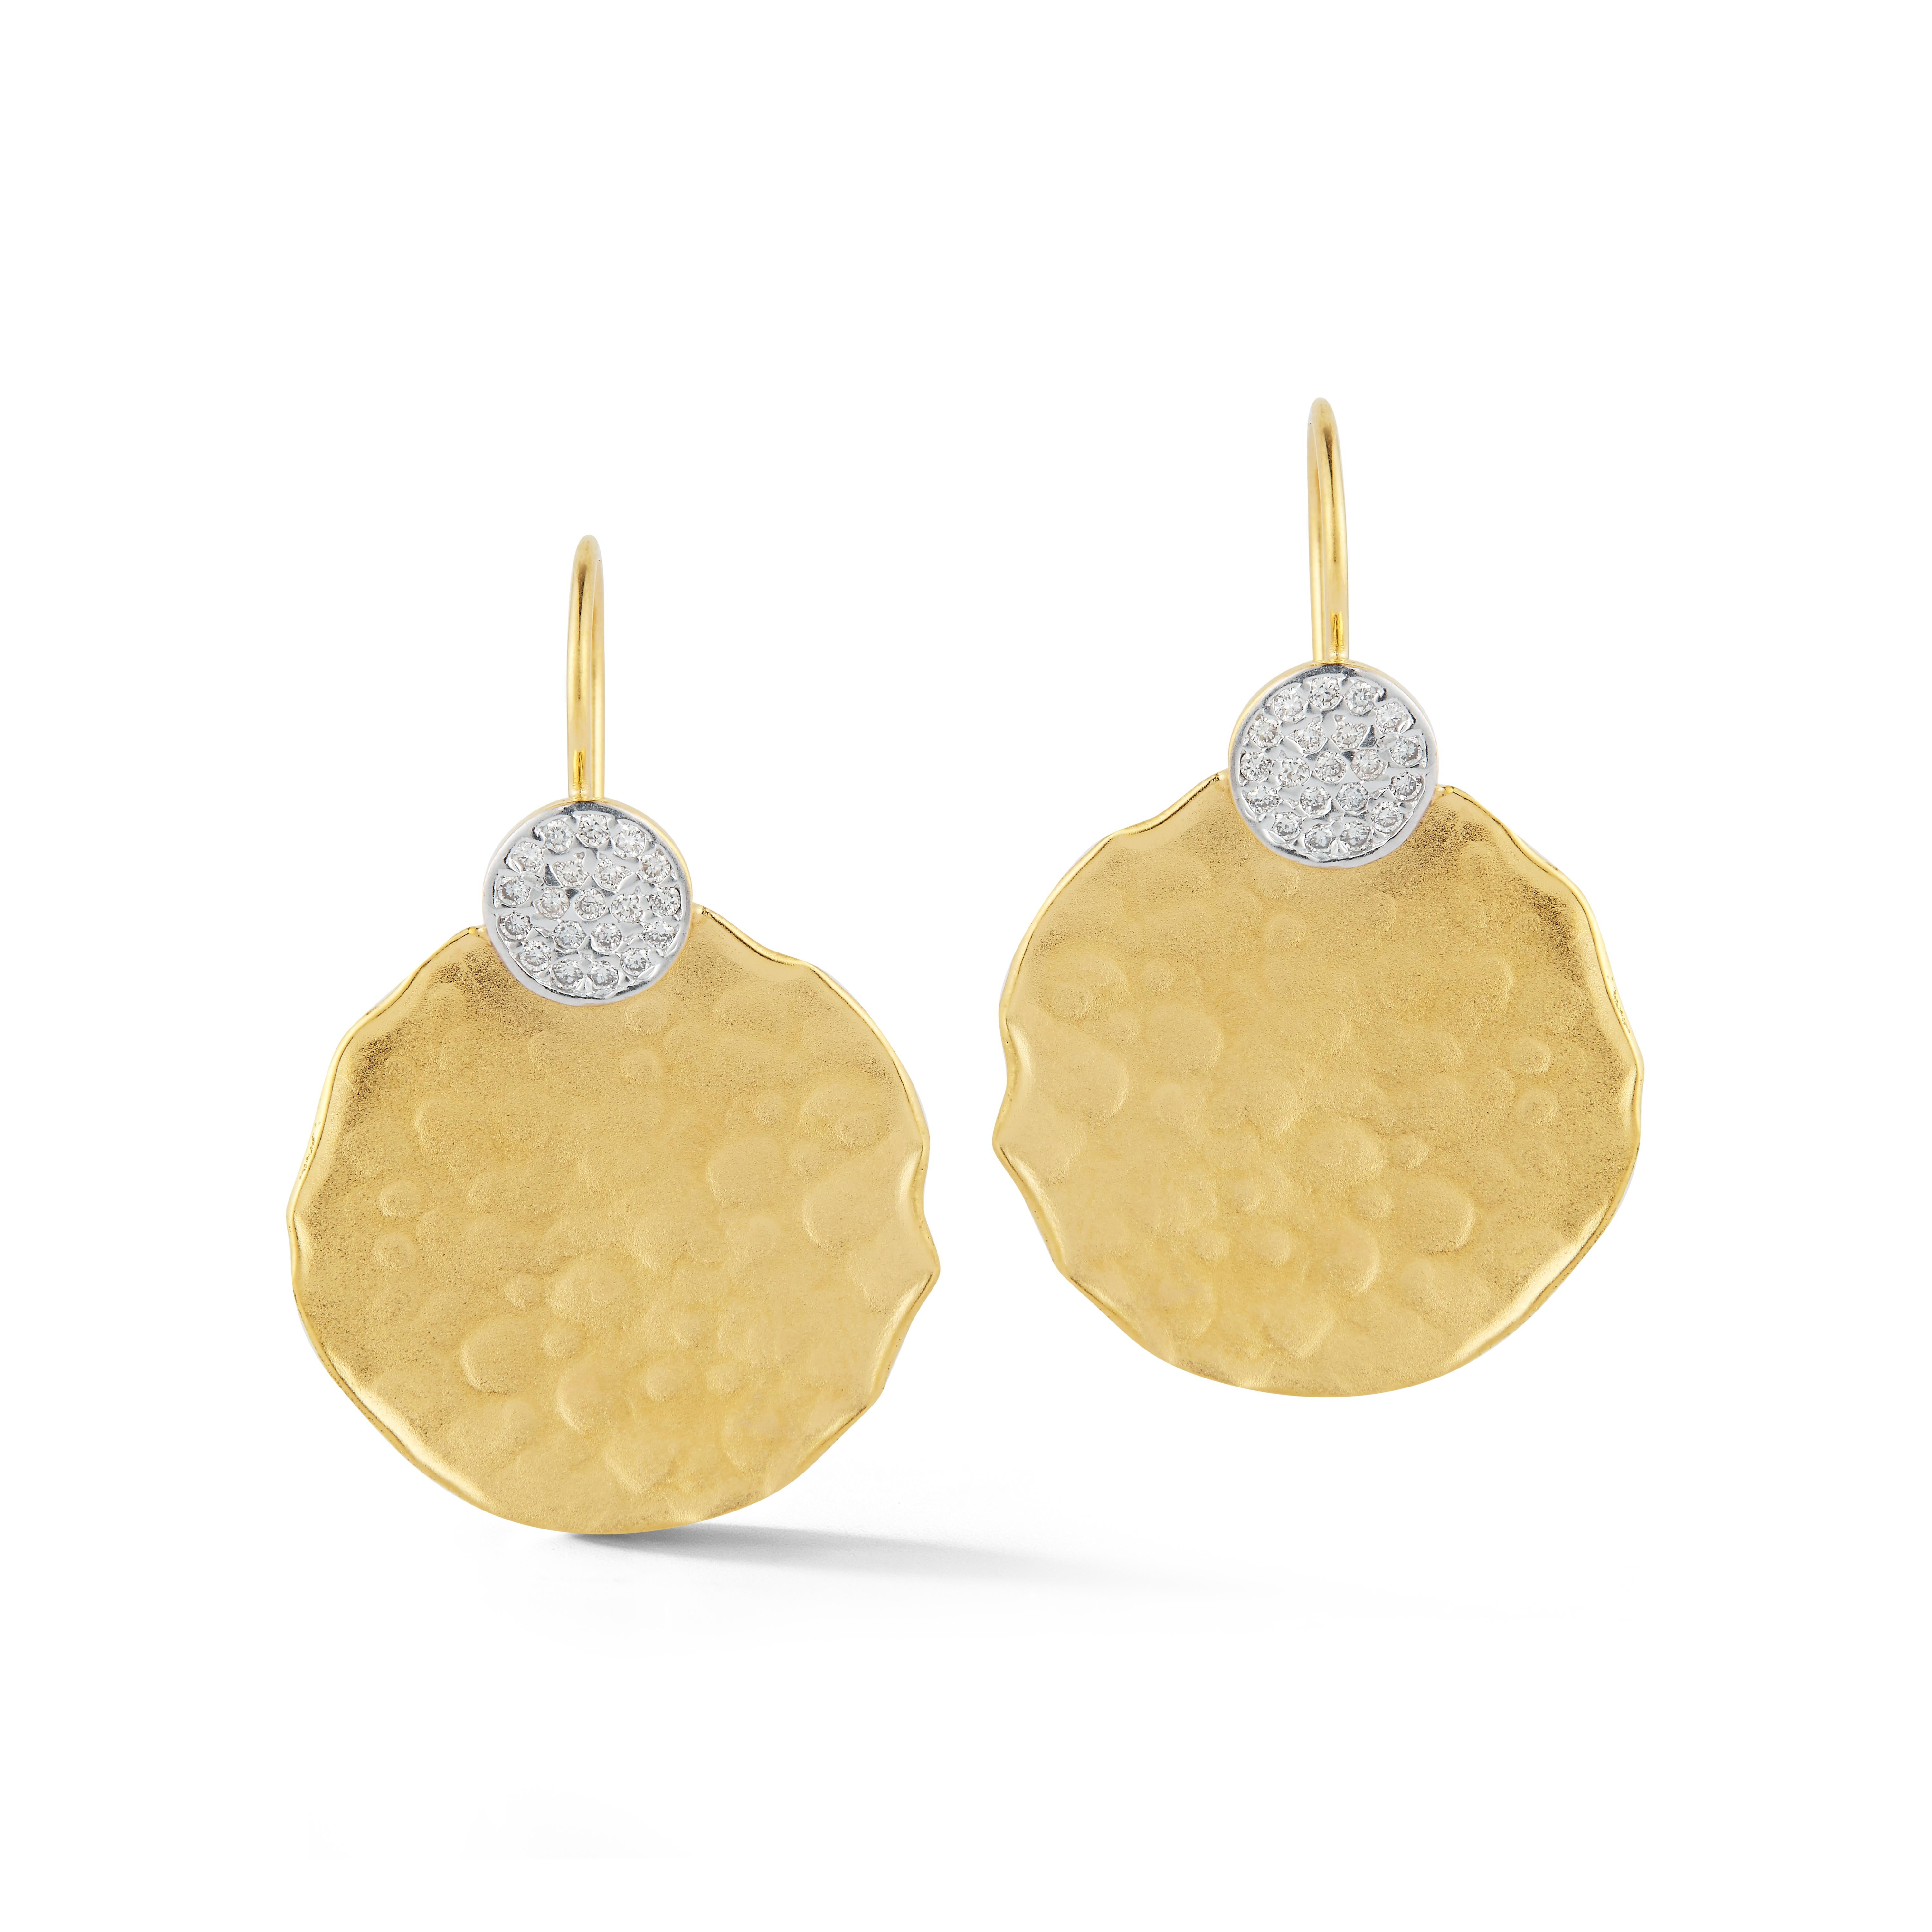 14 Karat Yellow Gold Hand-Crafted Matte and Hammer-Finished Scallop-Edged Round-Shaped Earrings, Enhanced with 0.24 Carats of Pave Set Diamonds on a Secured French Wire Backfinding.
